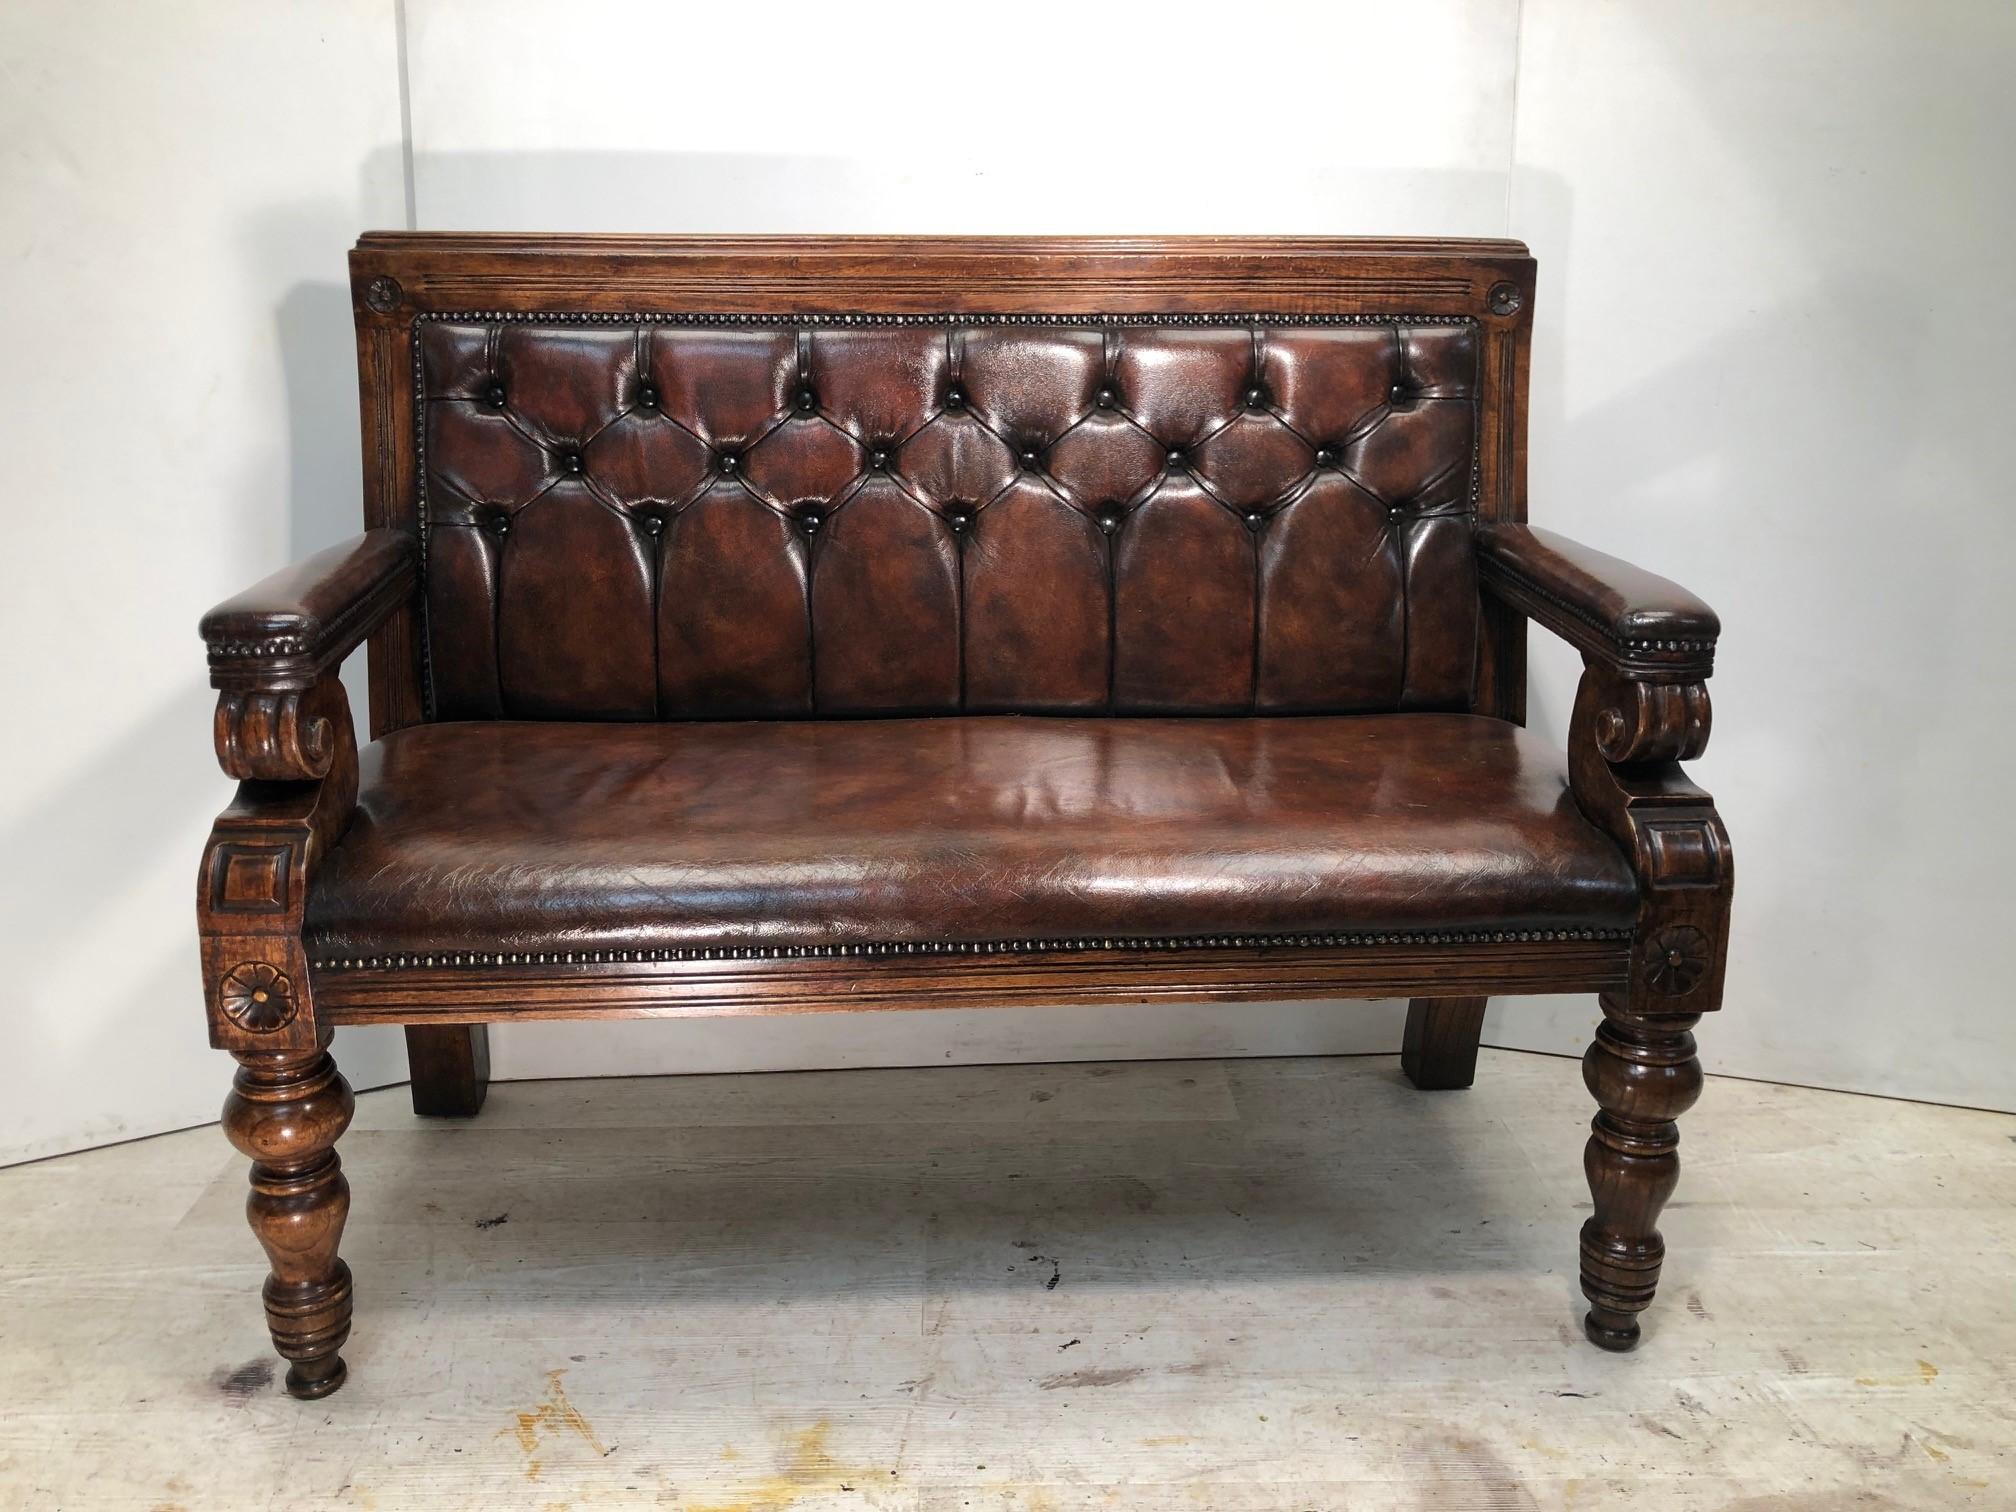 We are delighted to offer for sale this antique circa 1900, fully restored, hand dyed brown leather Chesterfield bench with oak frame

A very good looking well made and decorative bench, this is a quintessentially English, country house bench, it